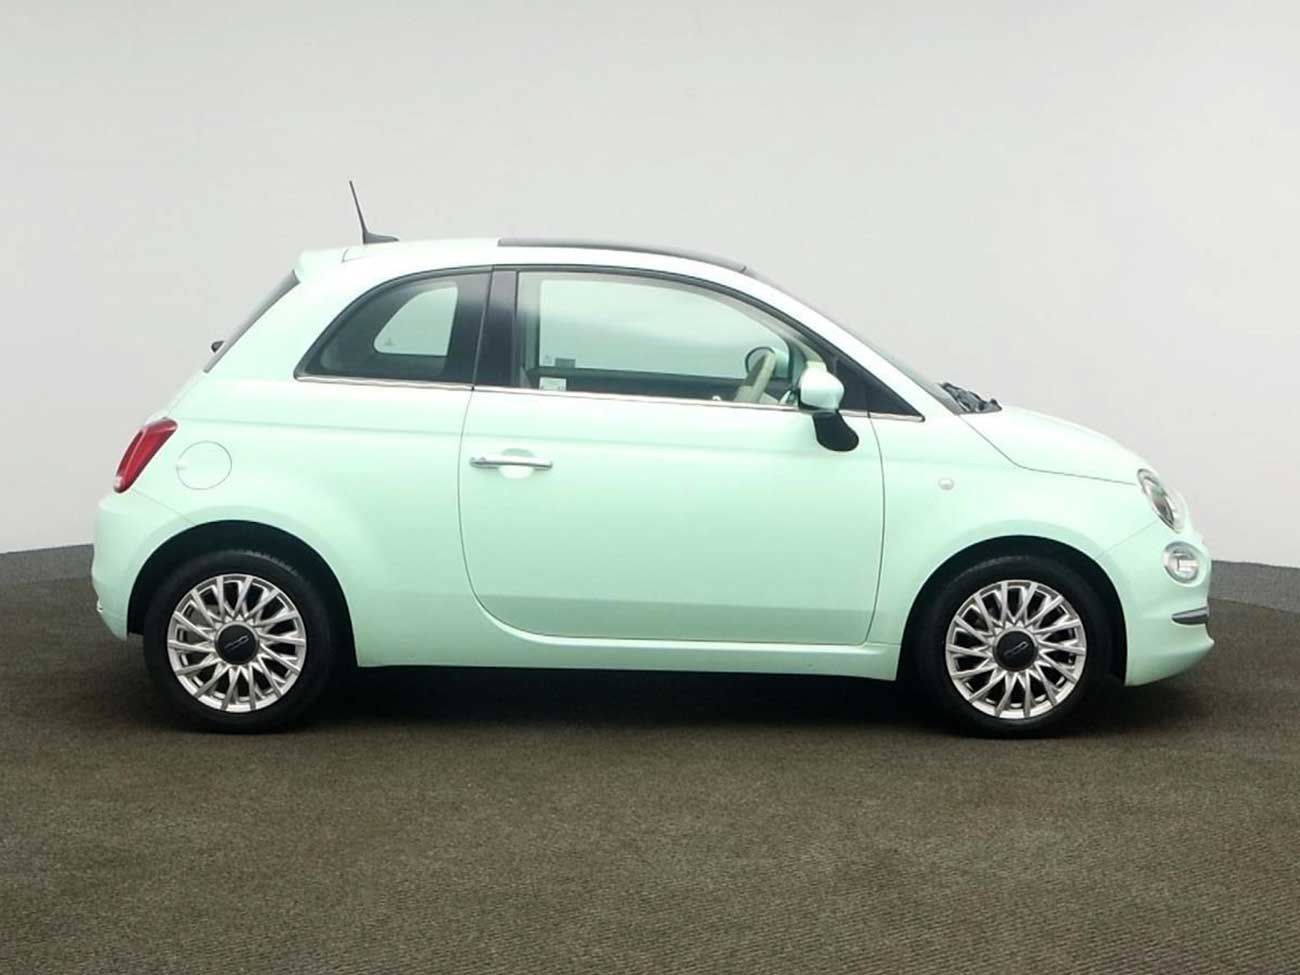 Side view of Fiat 500 in showroom